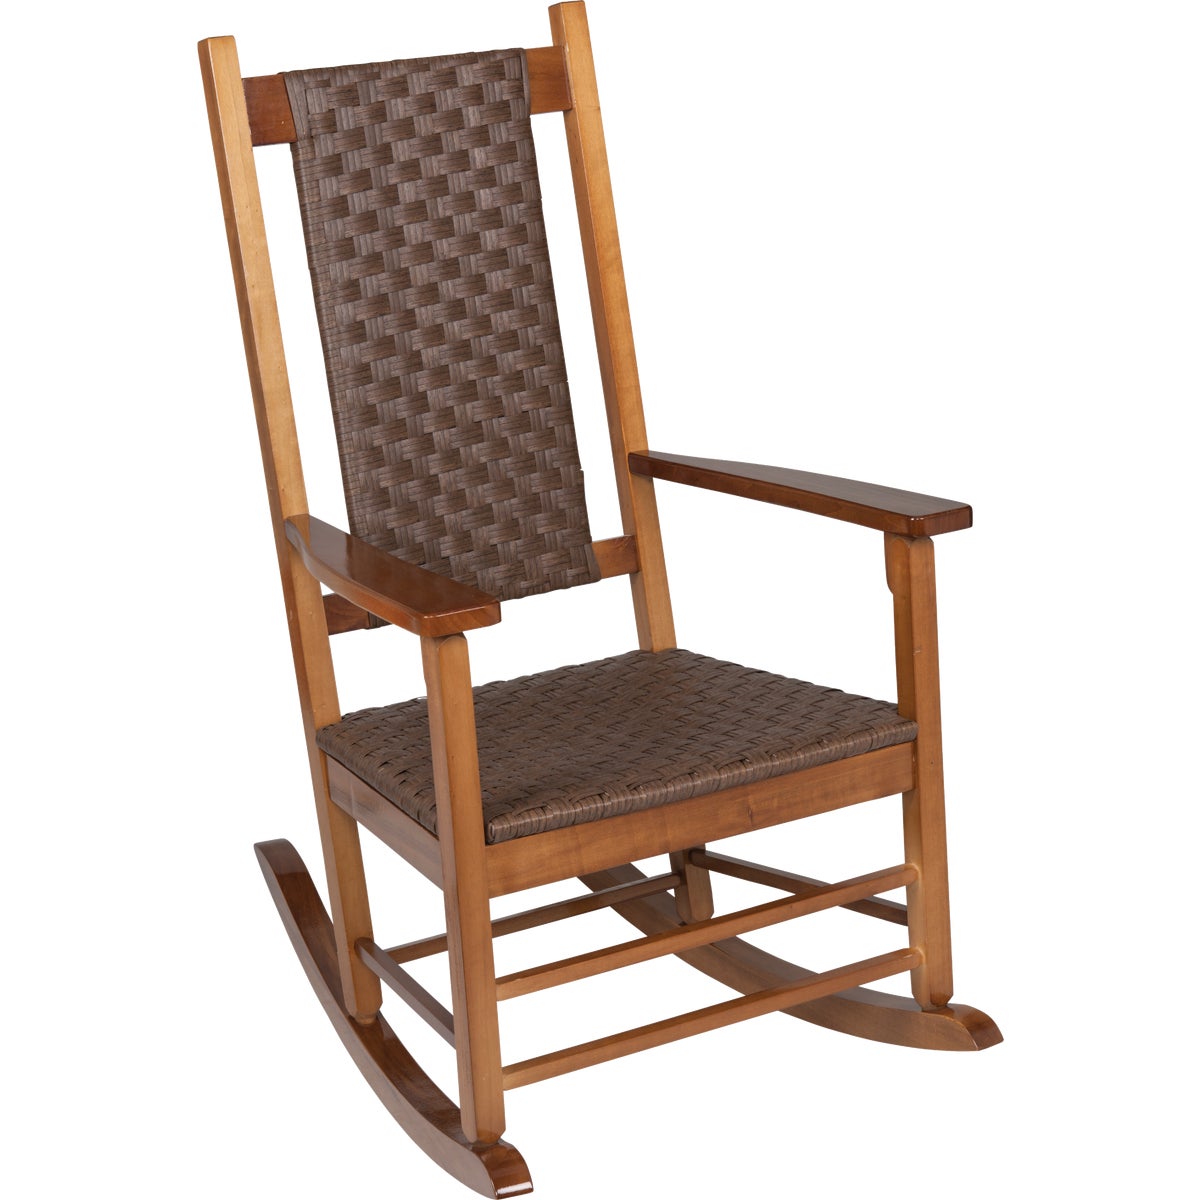 Item 801531, Classic outdoor style rocker ideal for front porches.